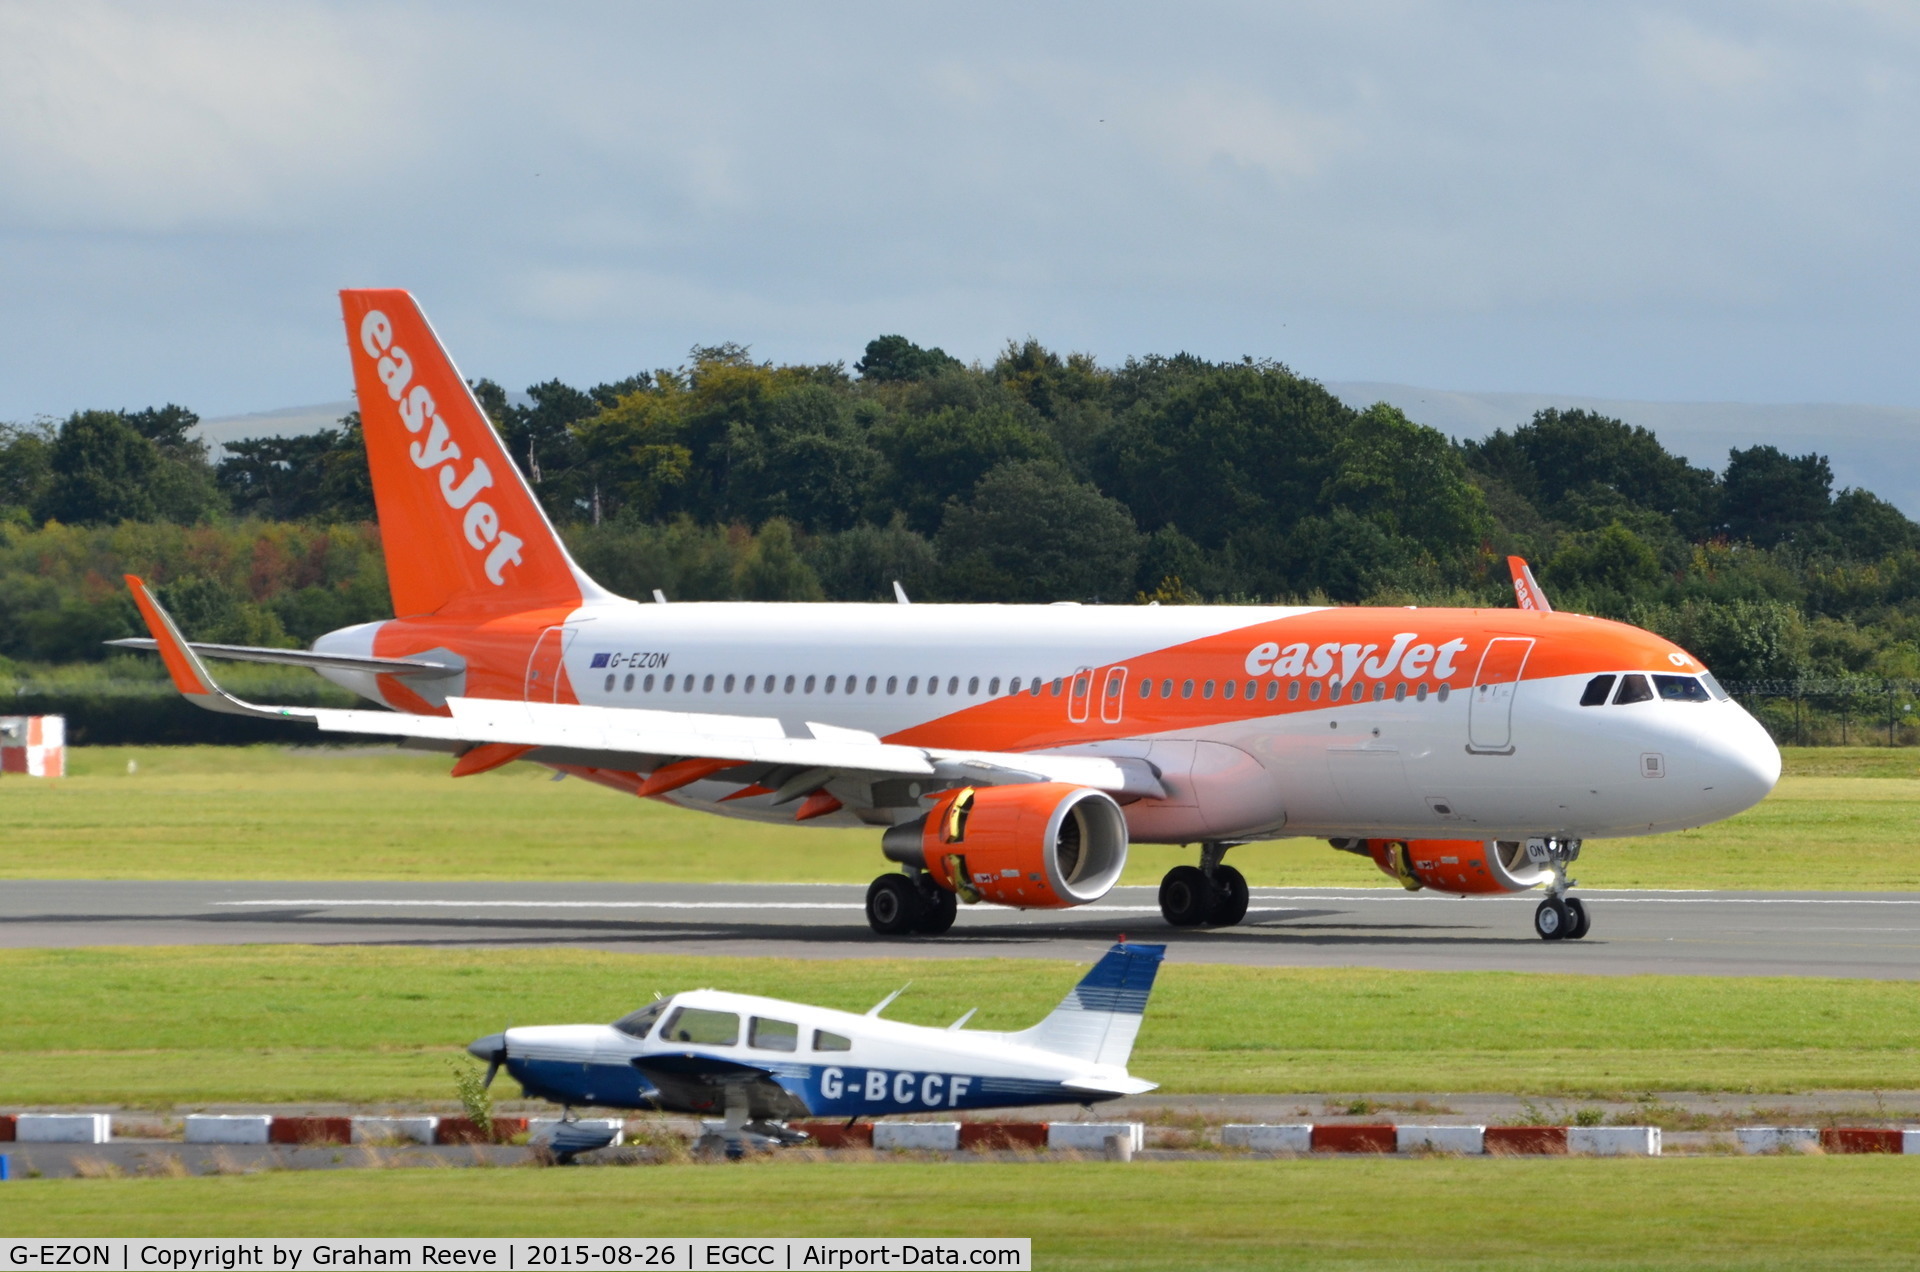 G-EZON, 2015 Airbus A320-214 C/N 6605, Just landed at Manchester.